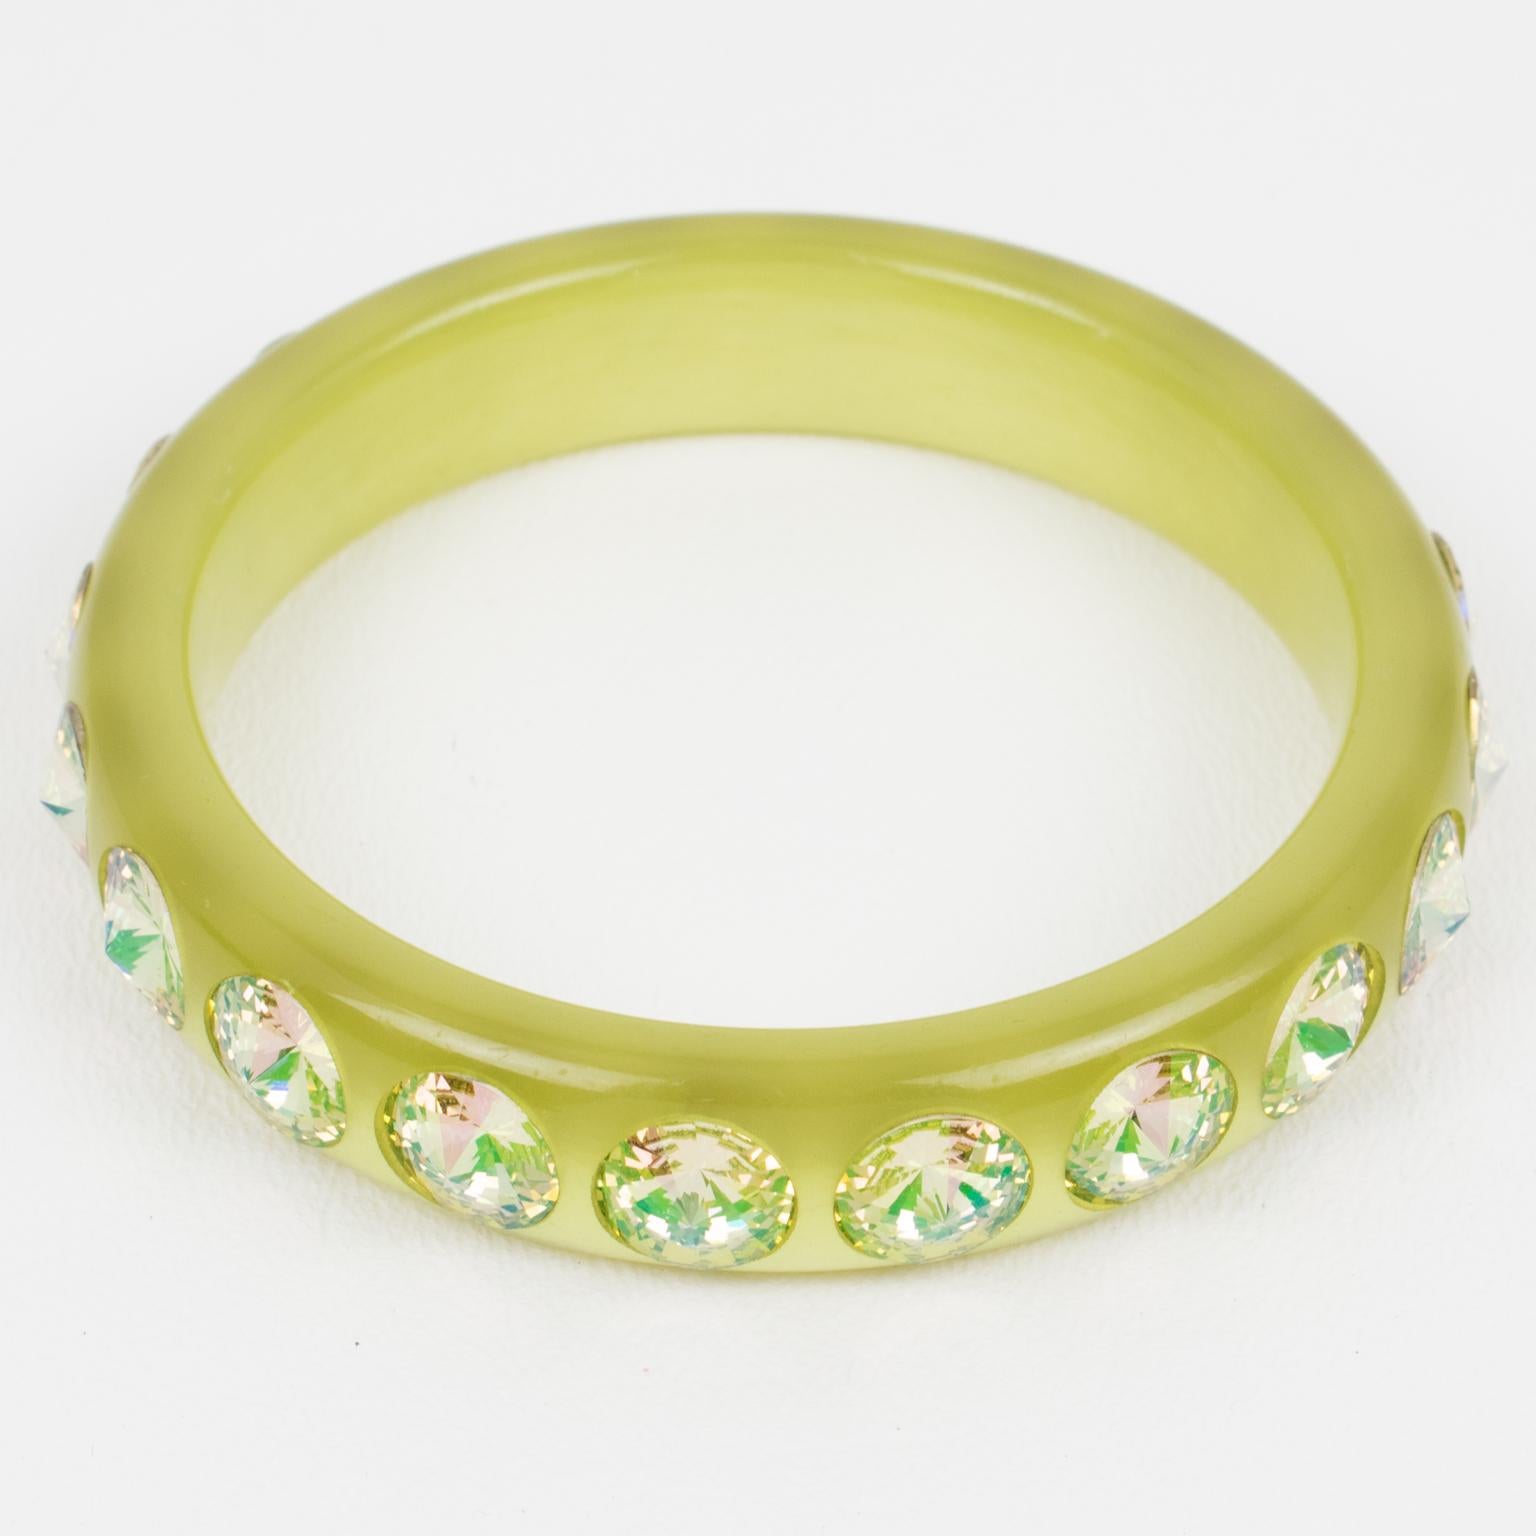 This superb Lucite bracelet bangle features a domed shape in an avocado green color. The bangle is ornate with massive pale yellow glitter crystal rhinestones. There is no visible maker's mark.
Measurements: Inside across is 2.57 in diameter (6.5